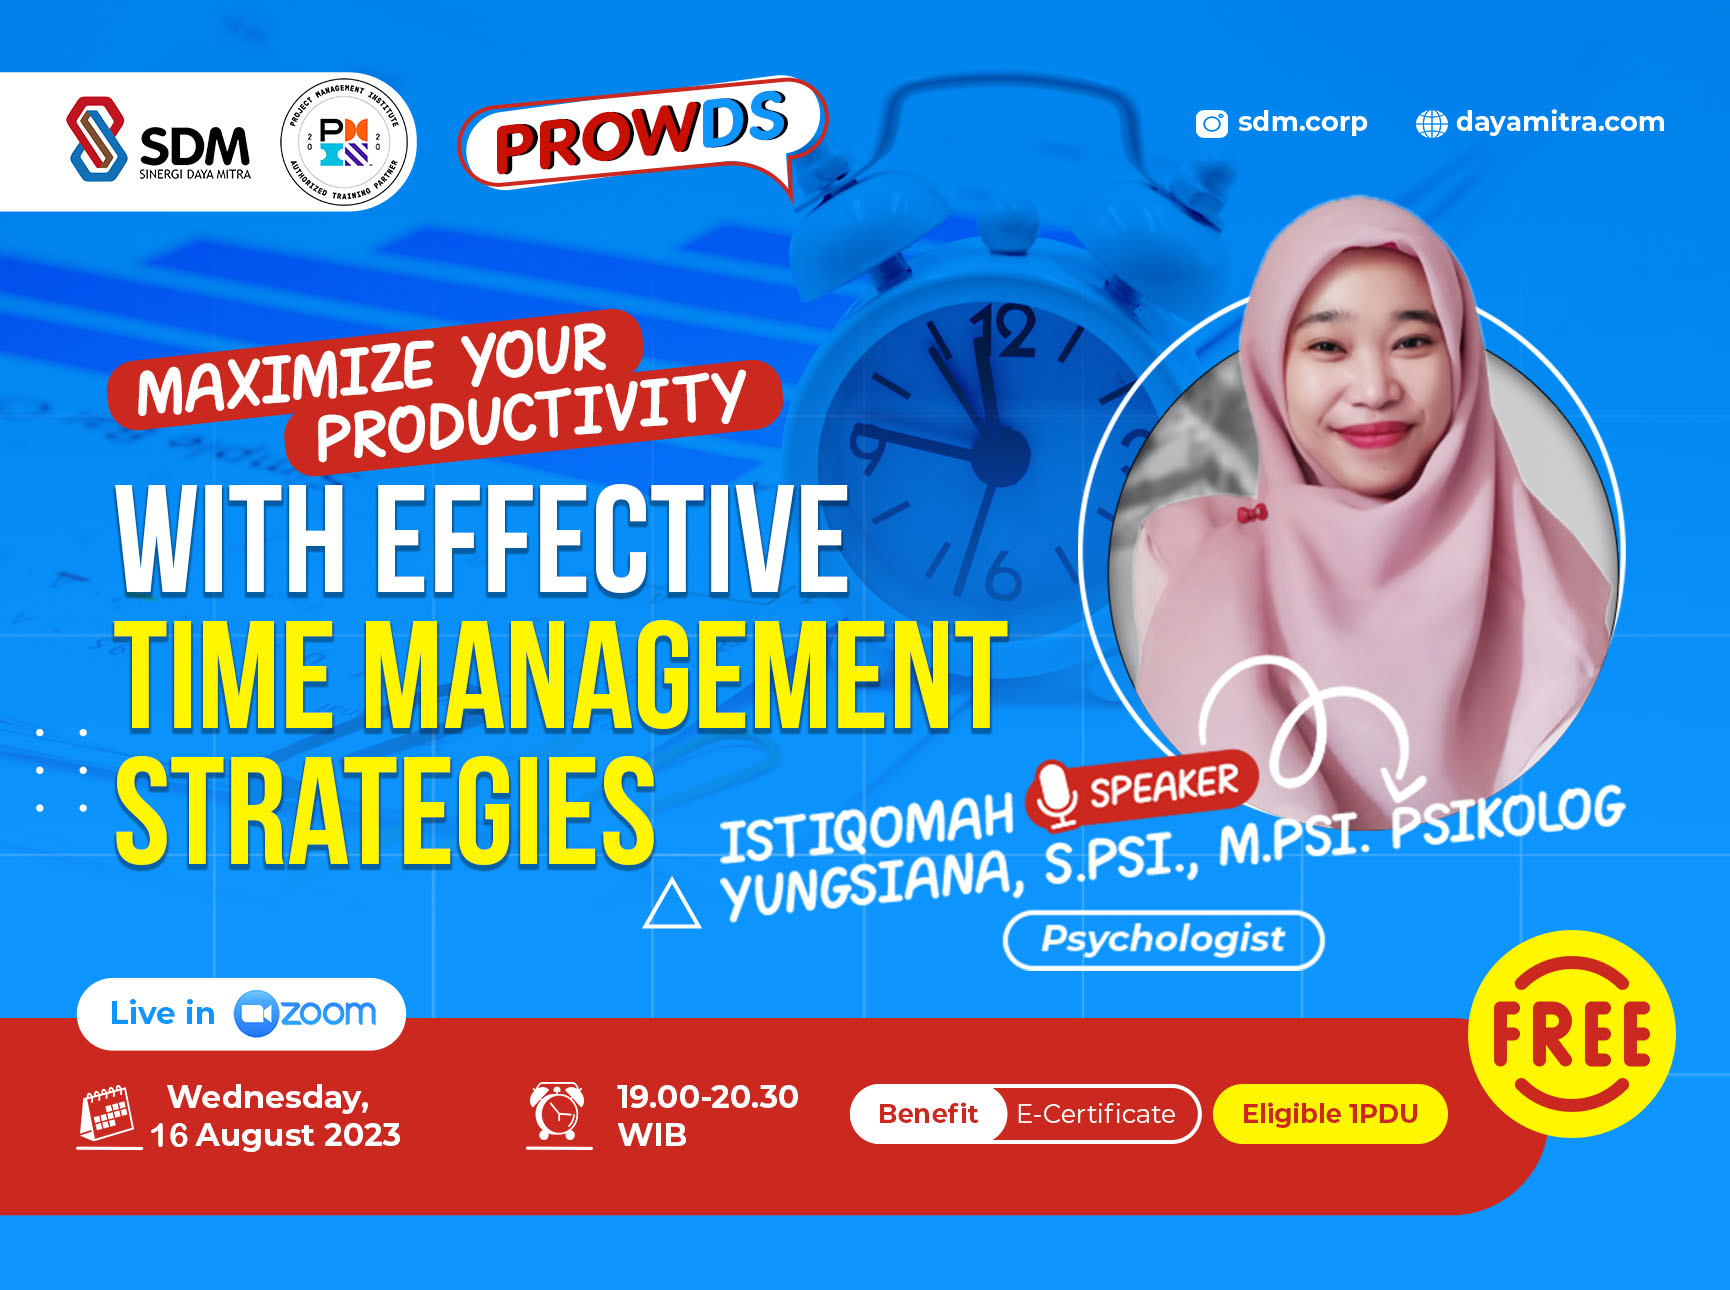 PROWDS : Maximize Your Productivity with Effective Time Management Strategies